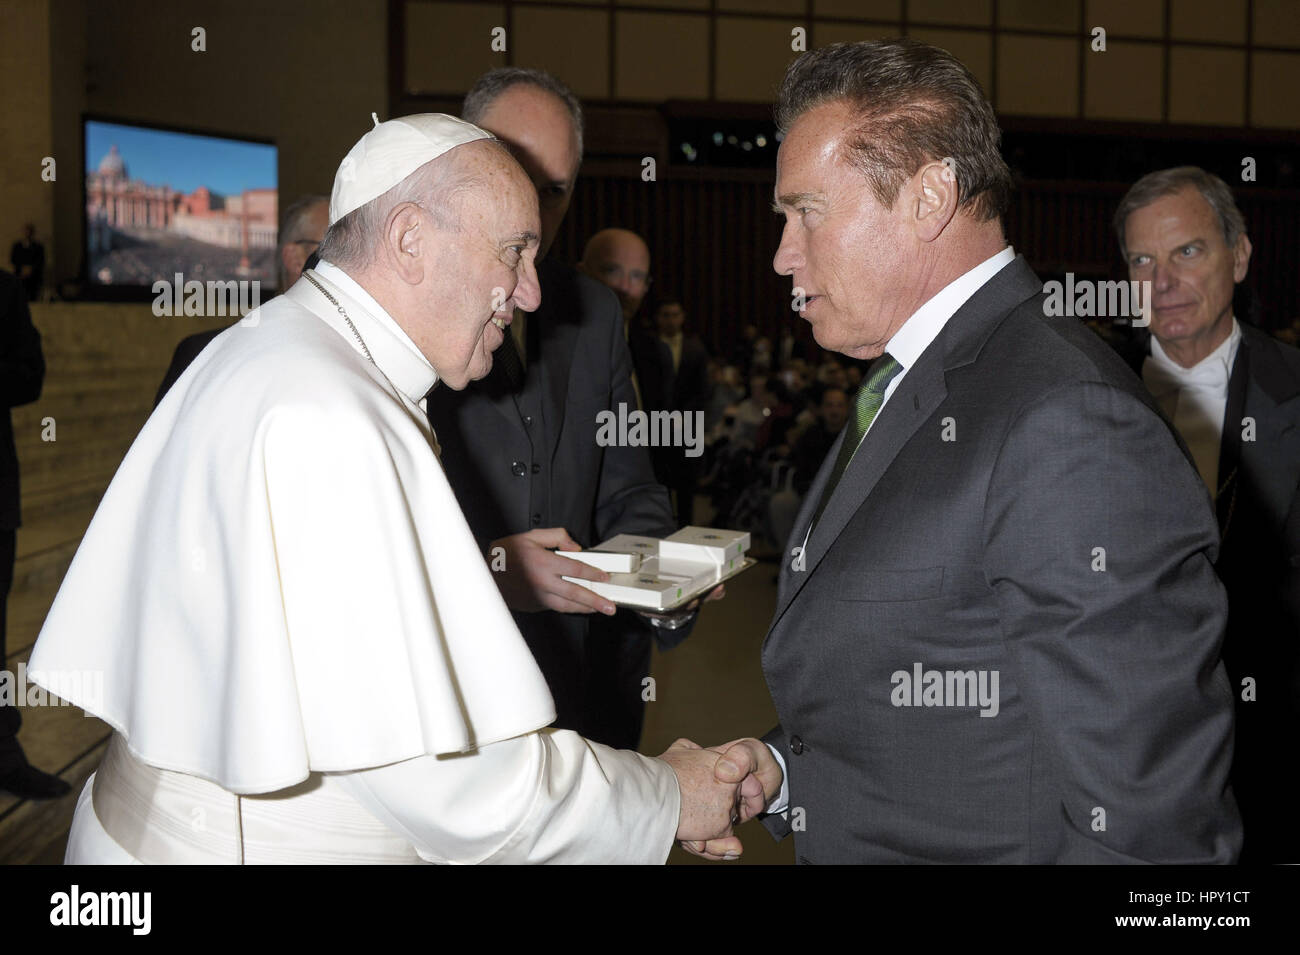 Pope Francis greets US actor and former governor of California Arnold Schwarzenegger during his weekly audience at the Paul VI Hall at the Vatican  Featuring: Arnold Schwarzenegger, Pope Francis Where: Rome, Italy When: 25 Jan 2017 Credit: IPA/WENN.com  **Only available for publication in UK, USA, Germany, Austria, Switzerland** Stock Photo